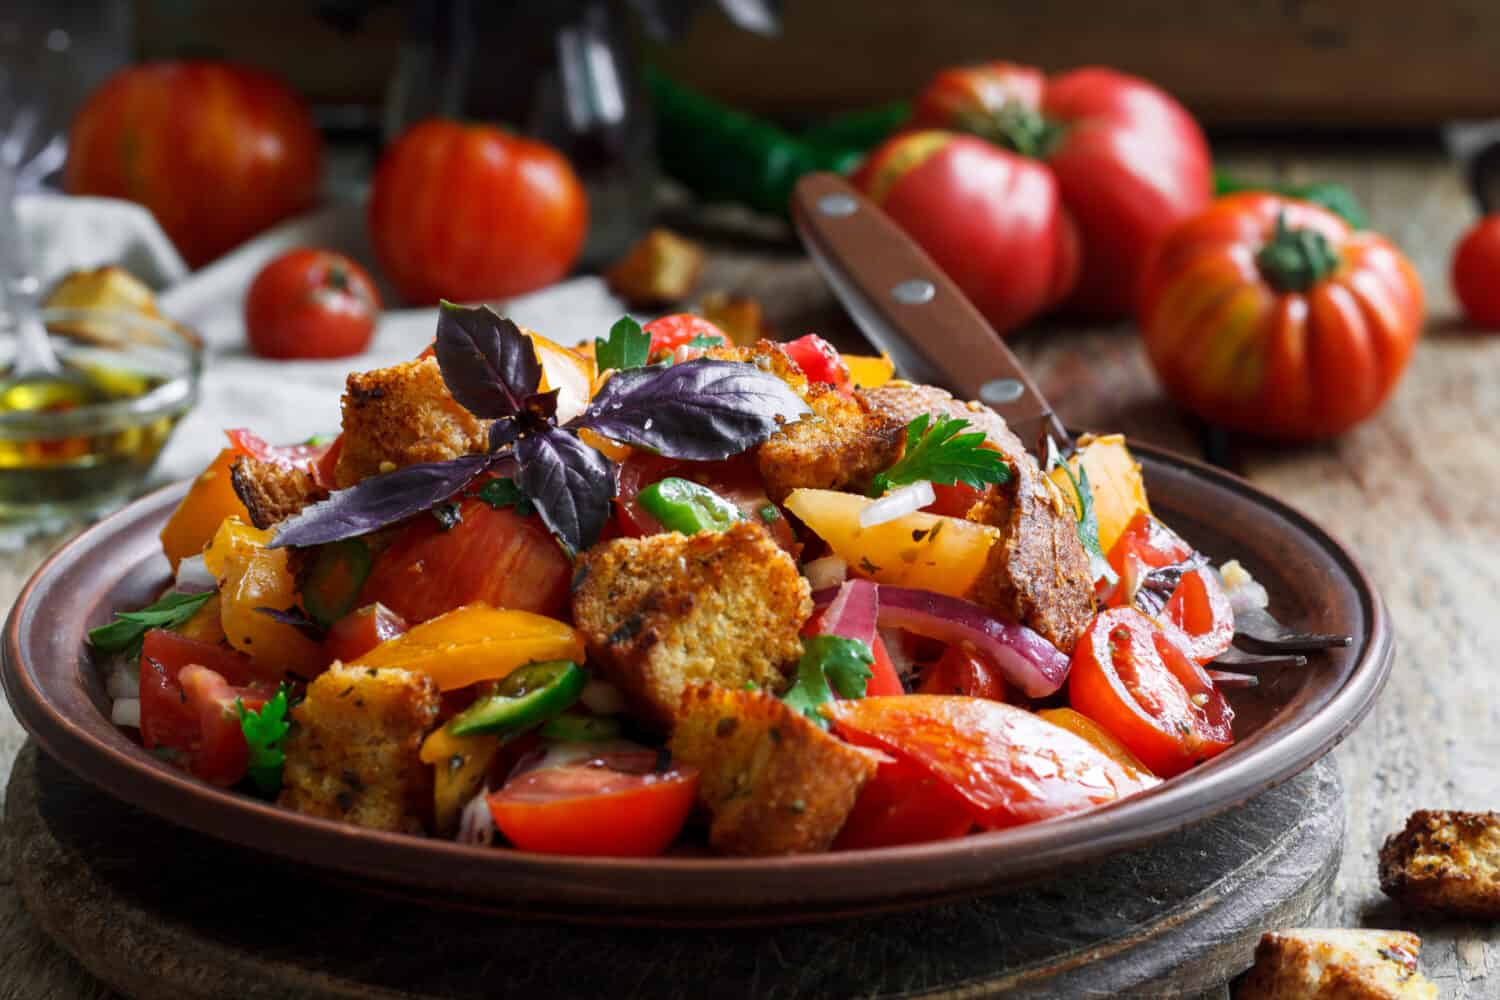 Panzanella, traditional Italian salad with tomatoes and bread